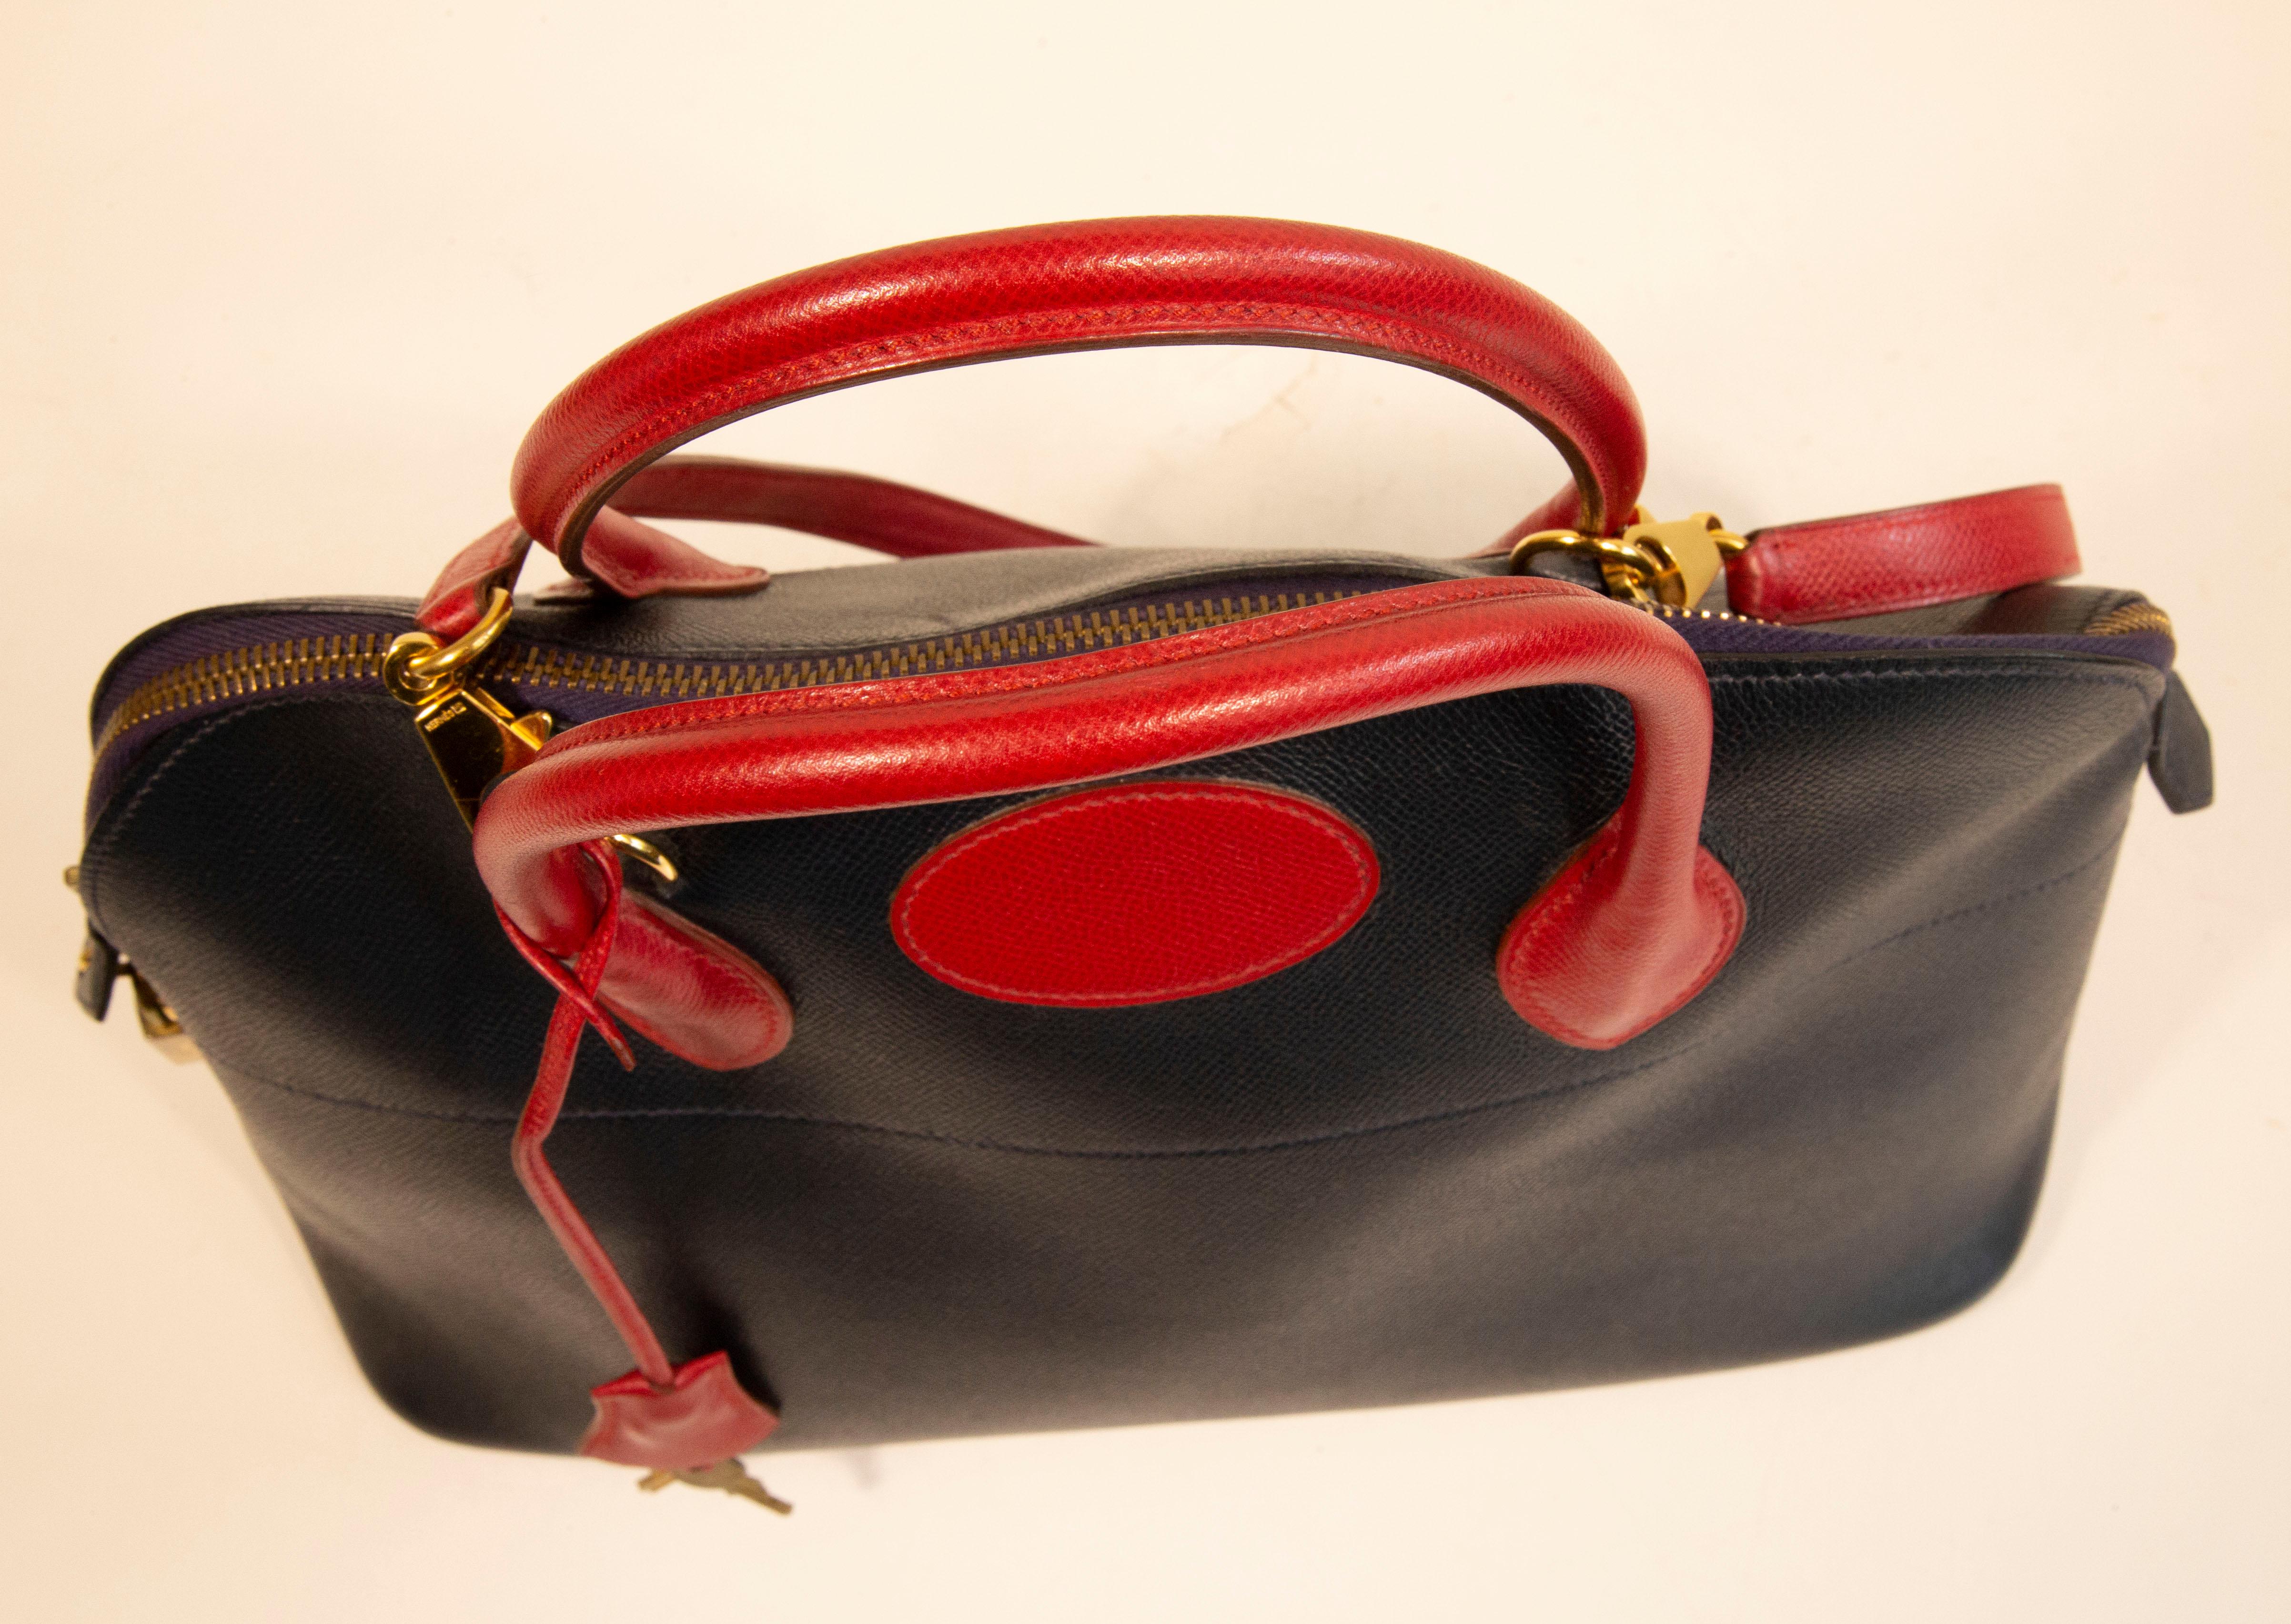 1990s Hermes Bolide 35 Bag in Navy Blue and Red Leather For Sale 4